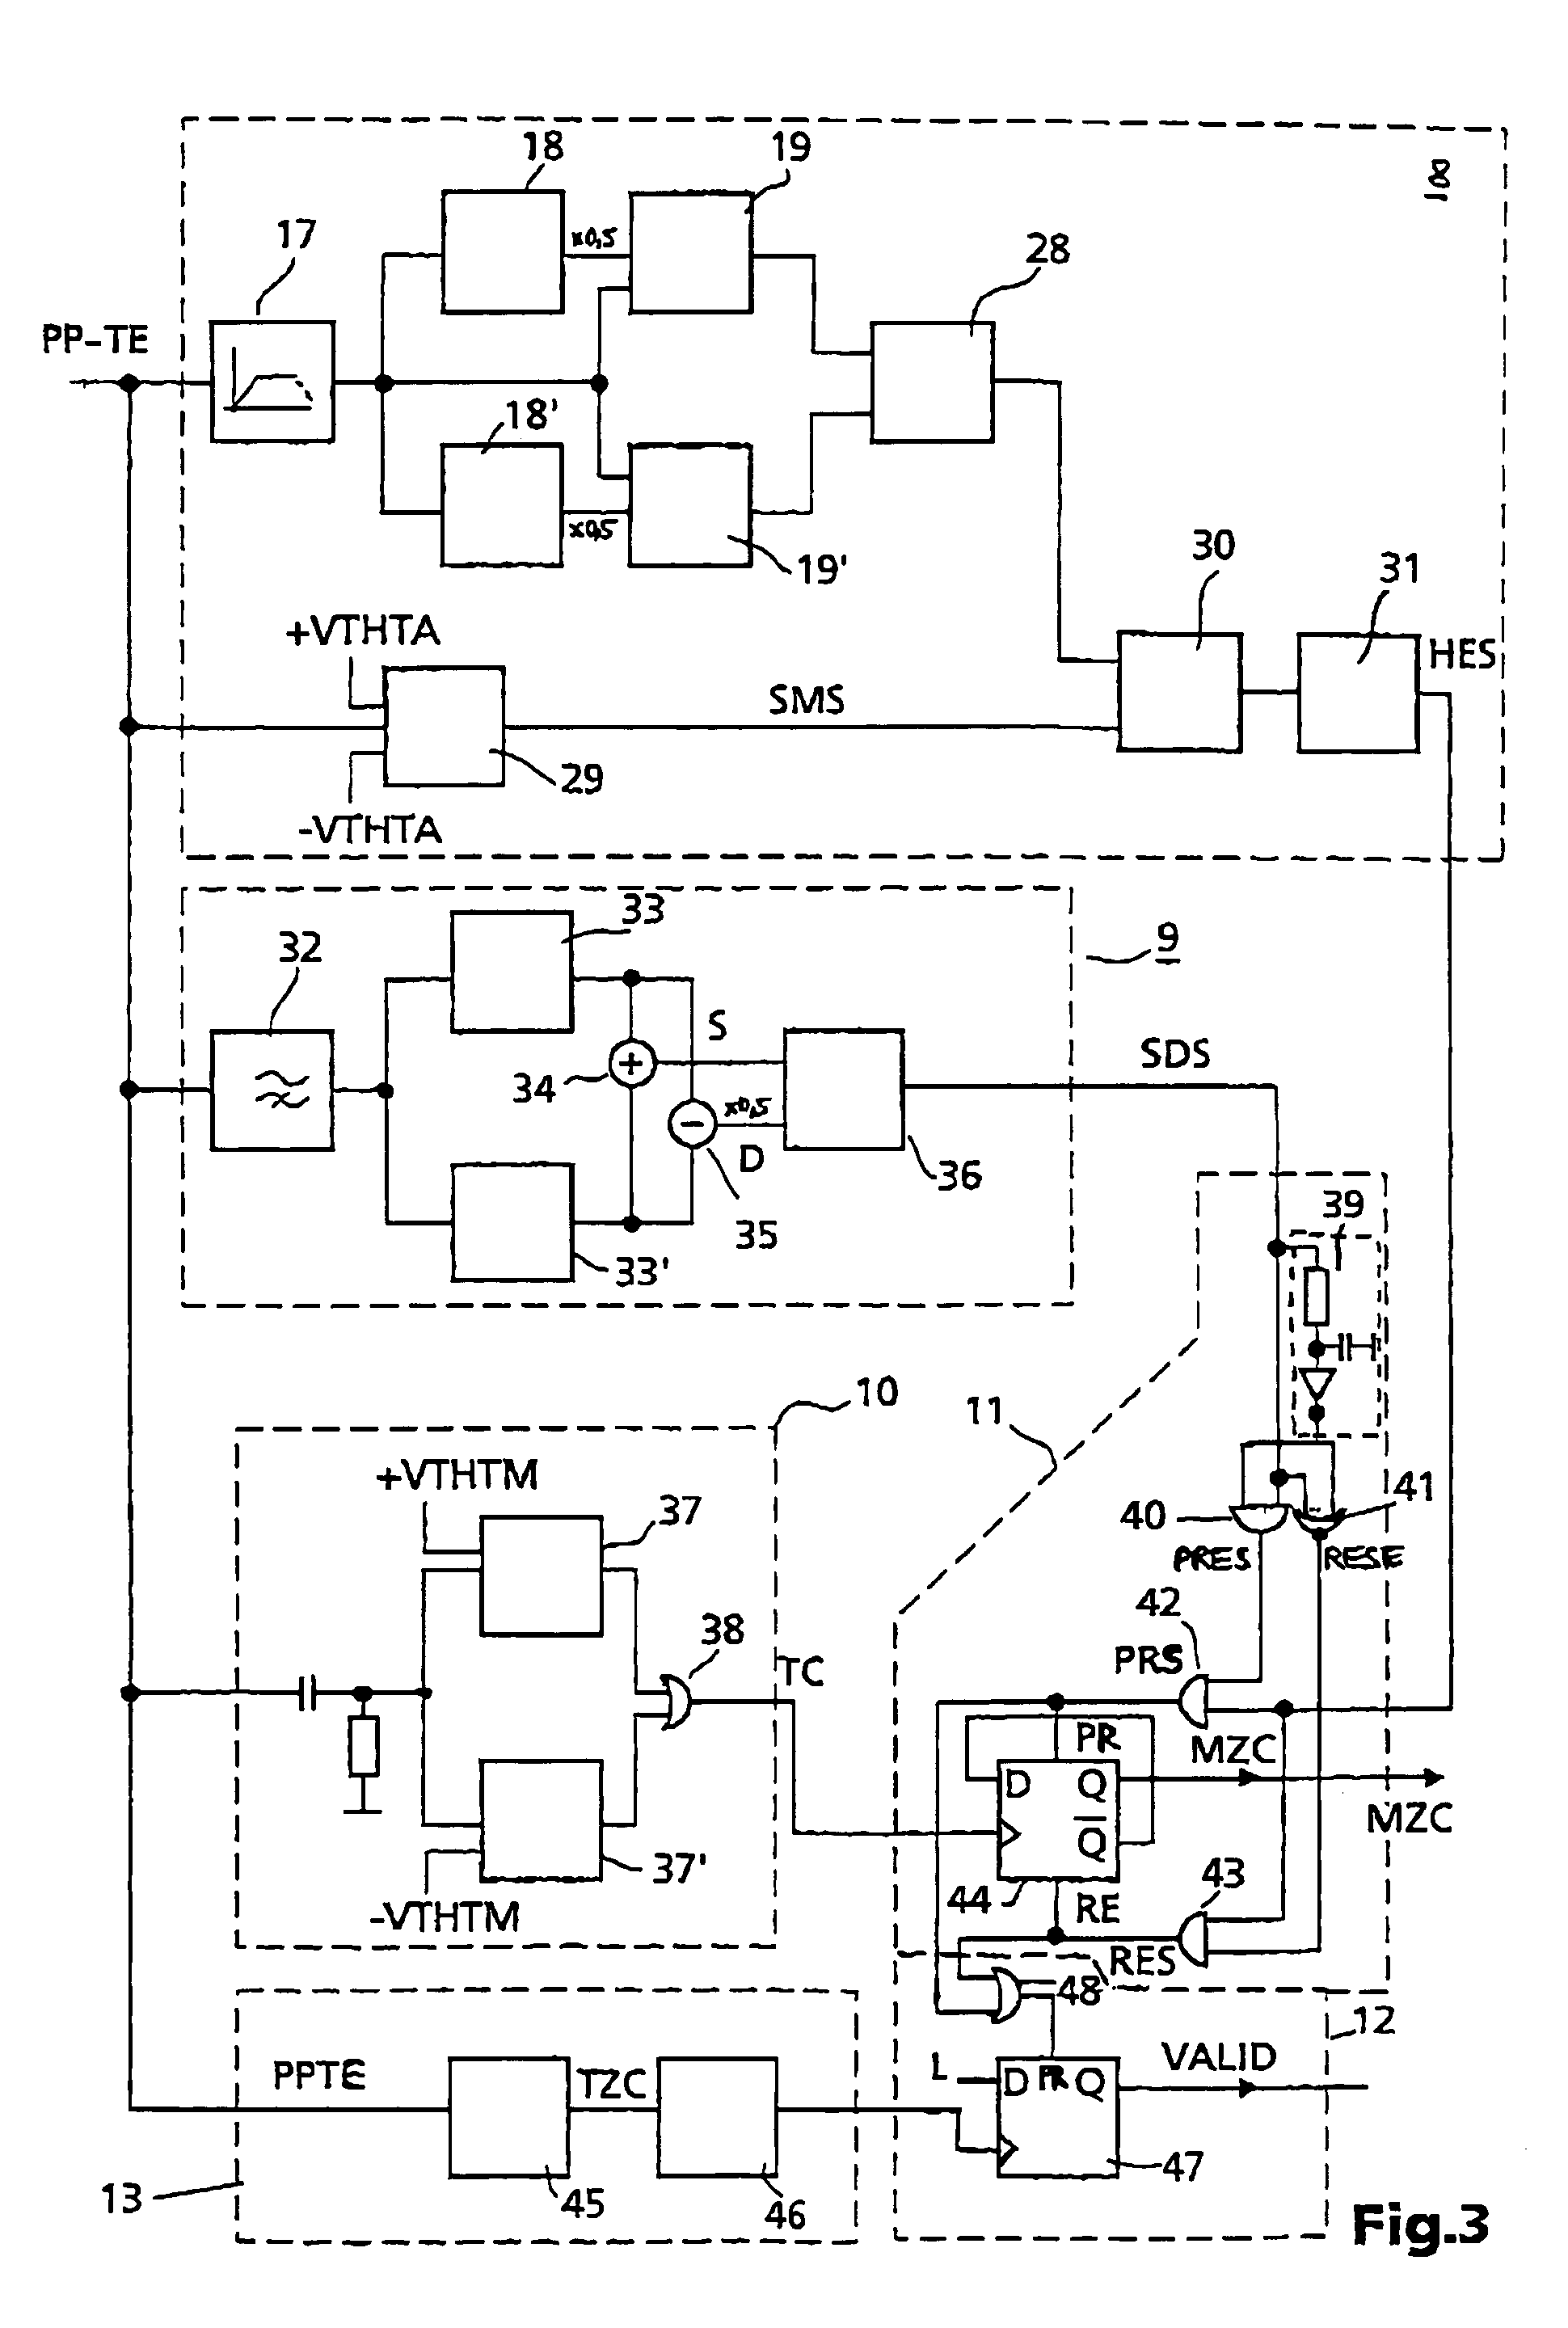 Apparatus for scanning optical recording media